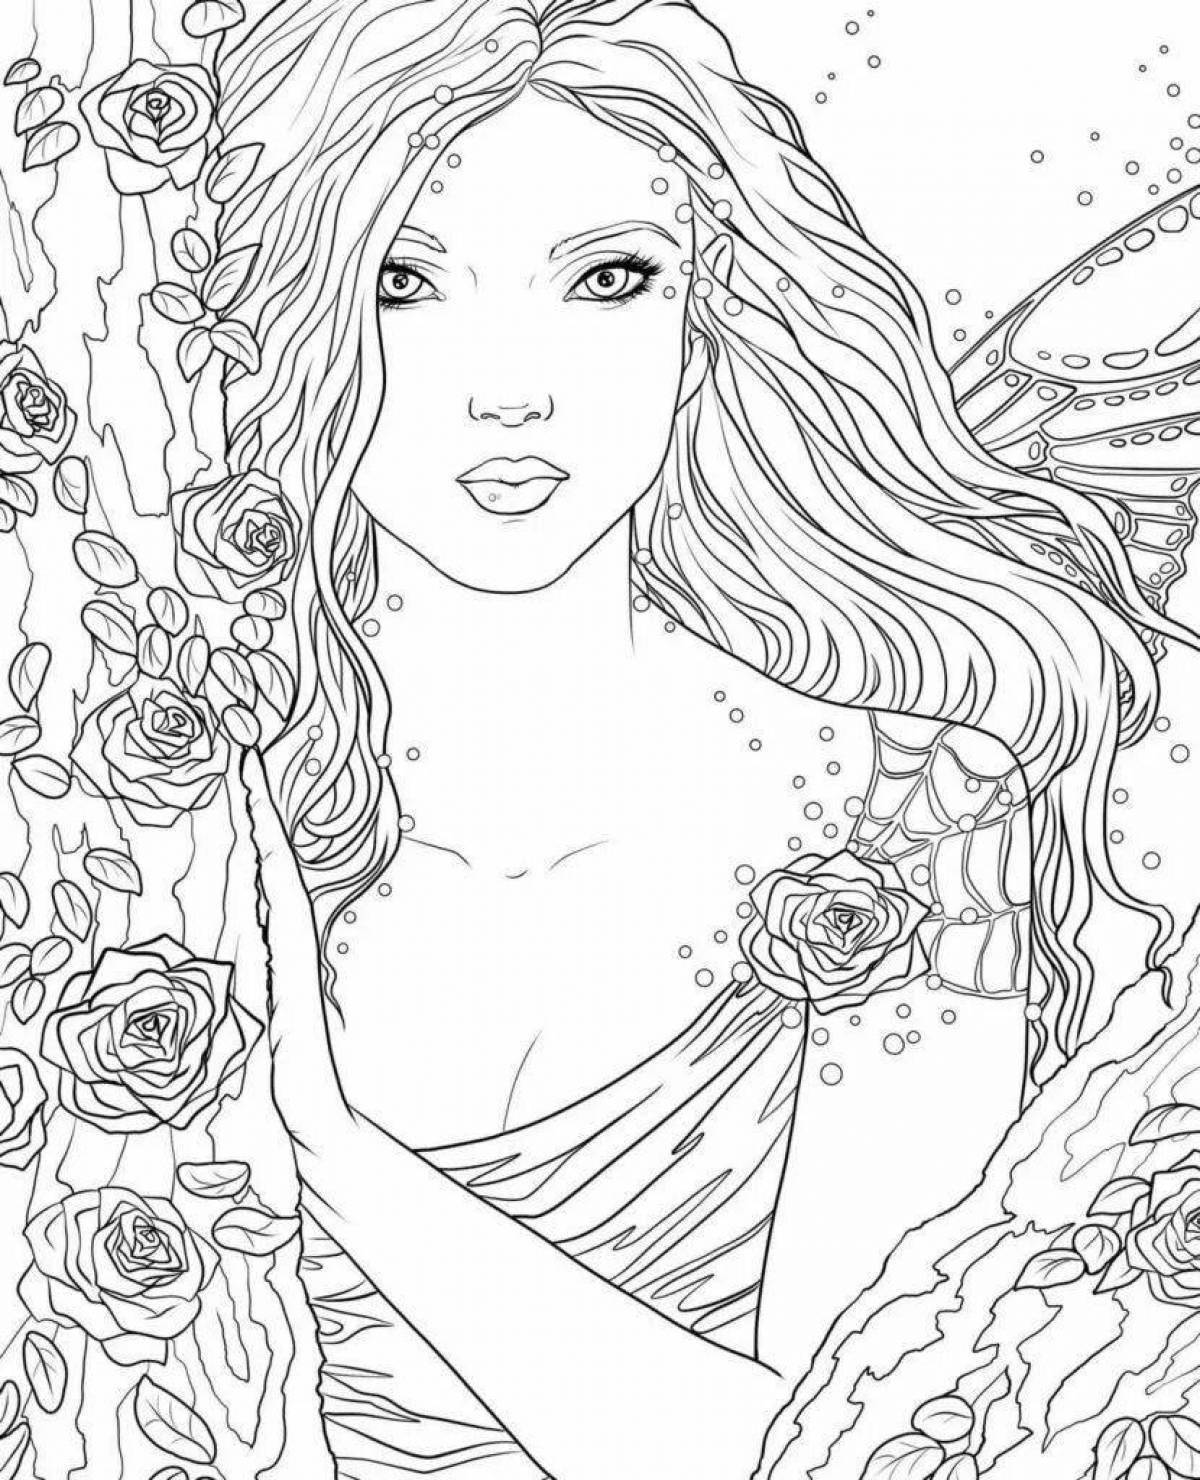 Joyful coloring page 18 for girls